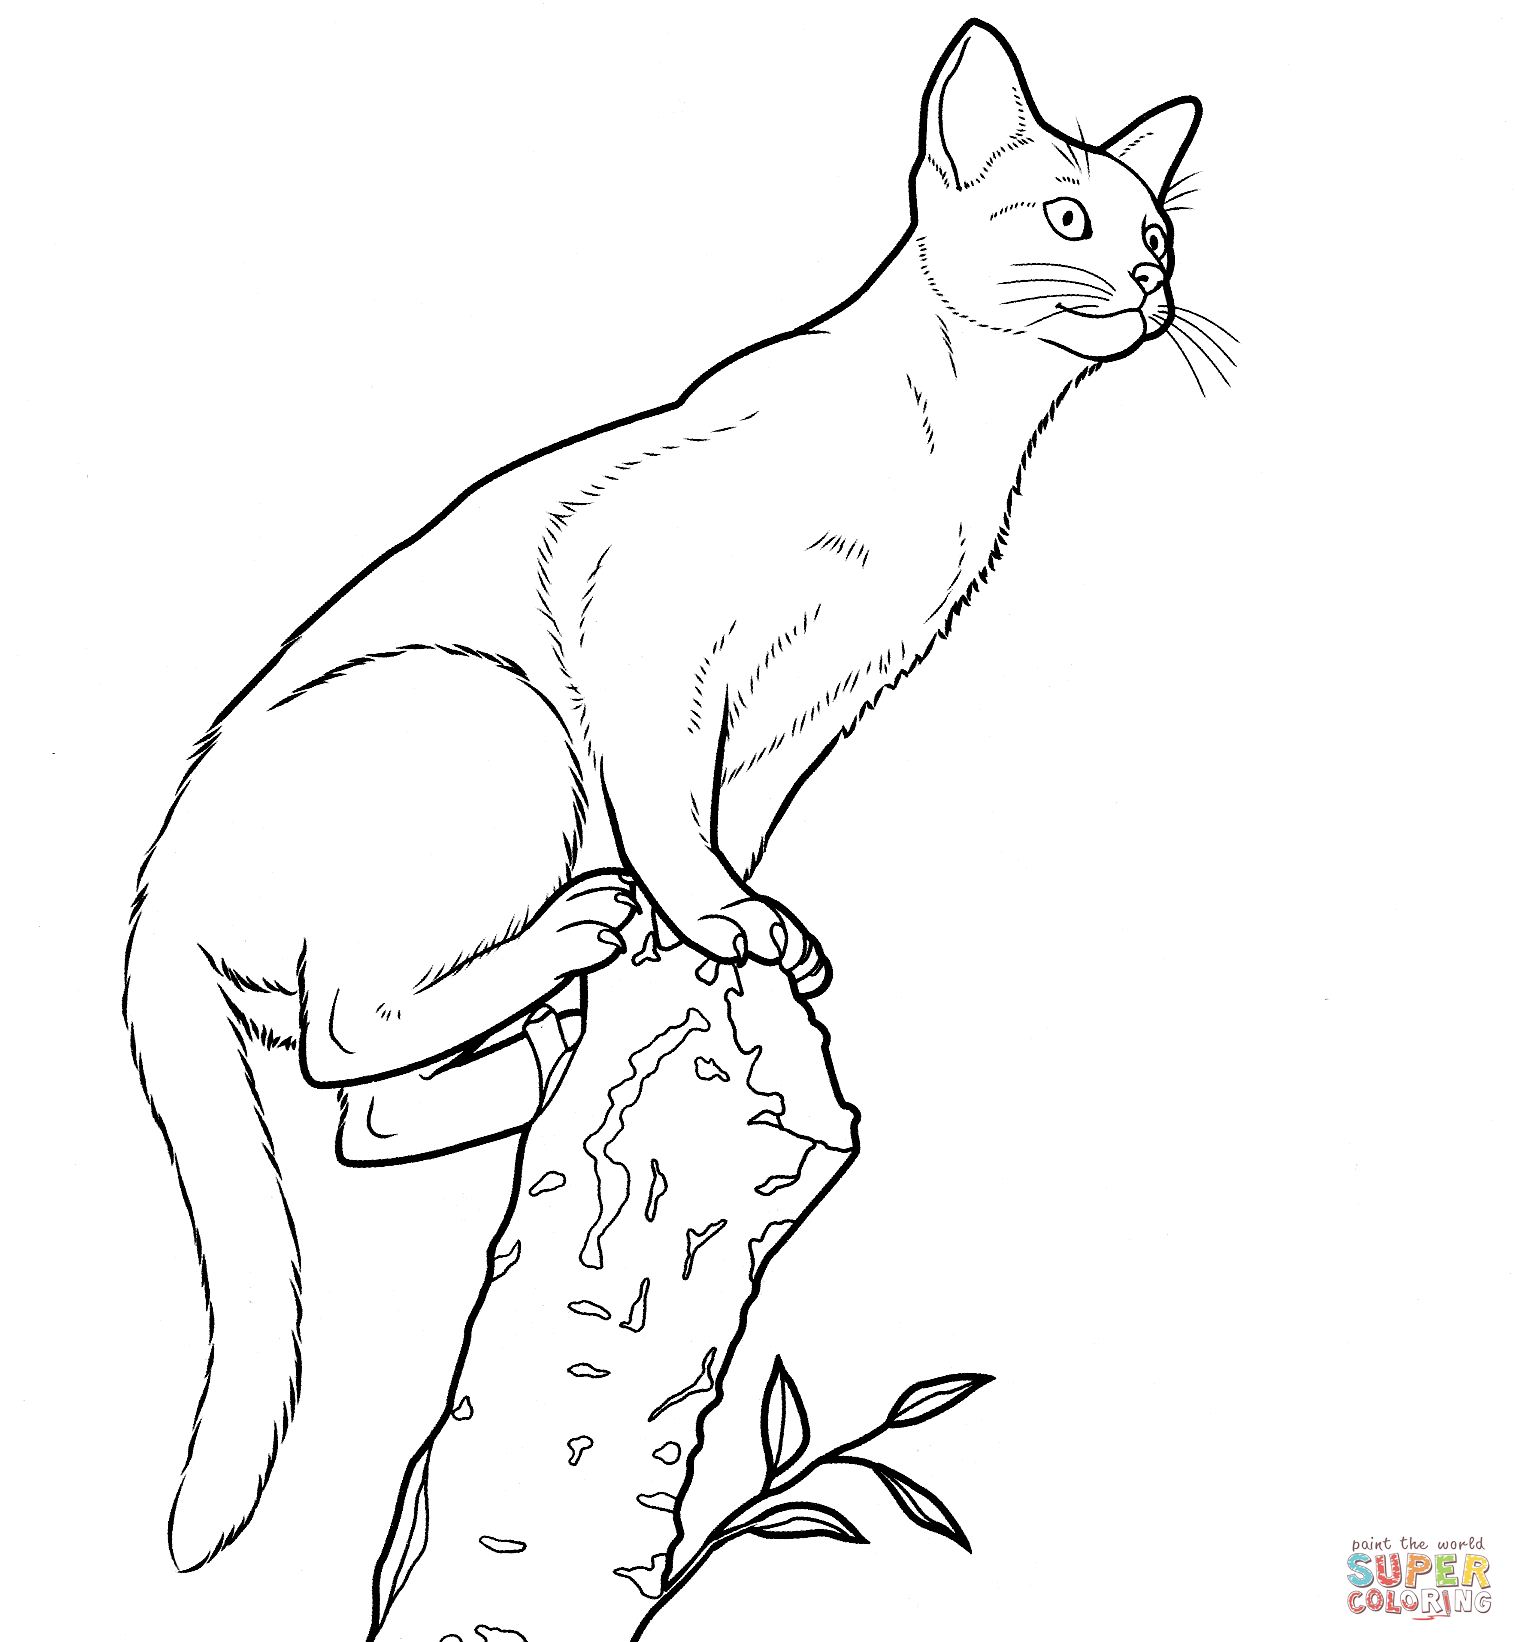 Abyssinian Cat coloring #6, Download drawings